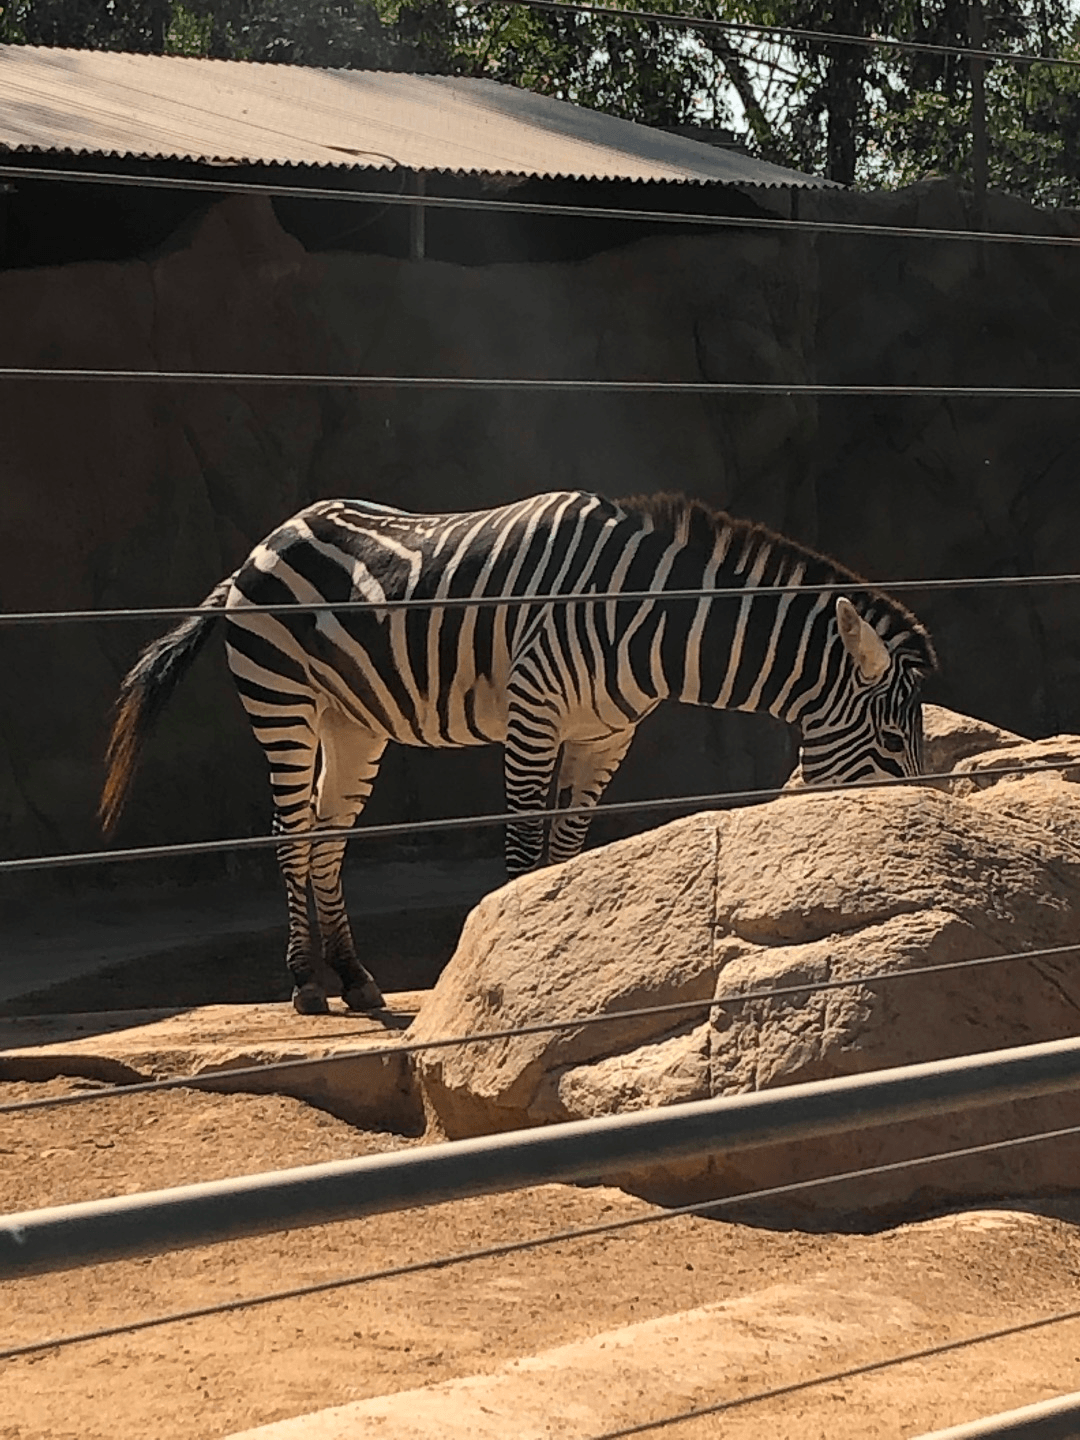 San Diego Zoo Tickets - Zoo Discounts & Deals | Tripster